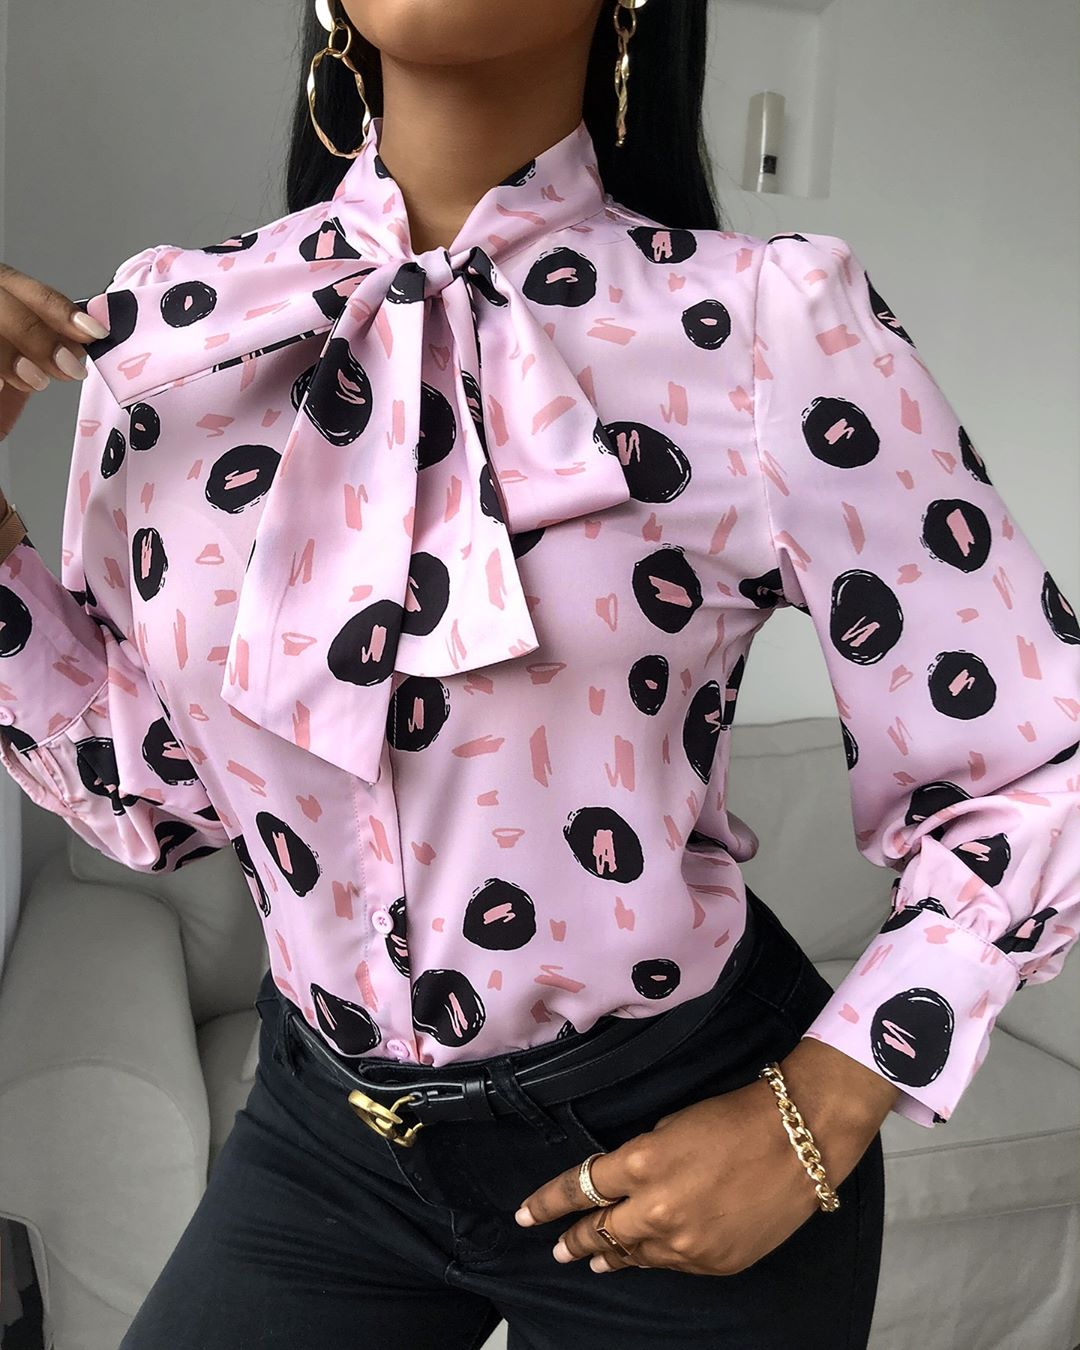 boutiquefeel_official - All Day, Everyday Blouses.⁠
Shop Iteam🔍: LD0389⁠
Shop:boutiquefeel.com⁠
⁠
 #fashion #ootd #style